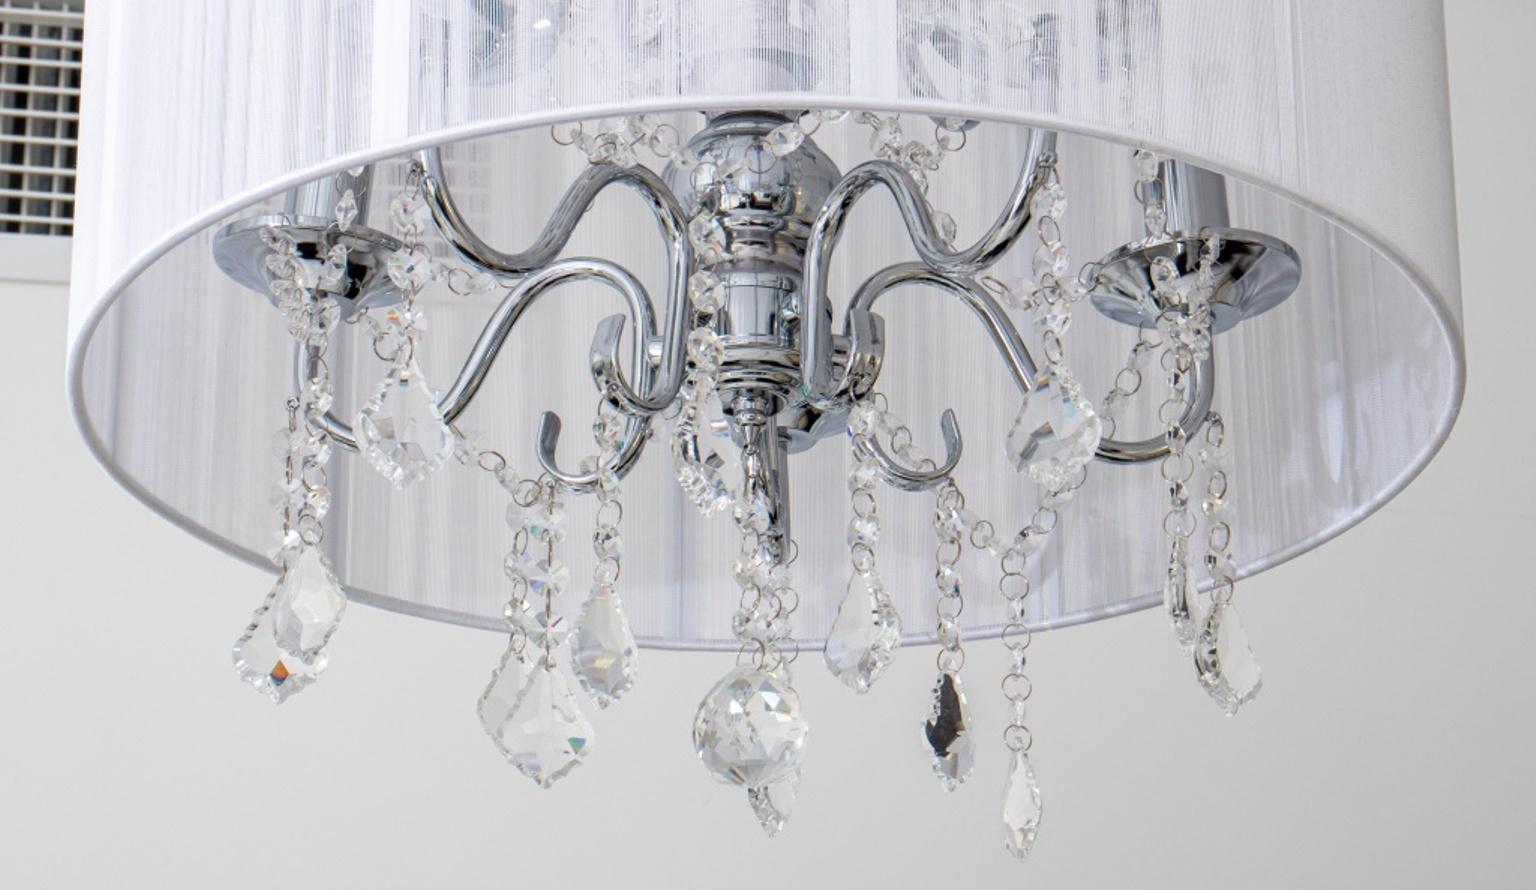 Modern Hollywood Glam chandelier with colorless crystal drop pendants, white string shade, and ten silver-tone metal arms terminating in candlestick form lights. 45